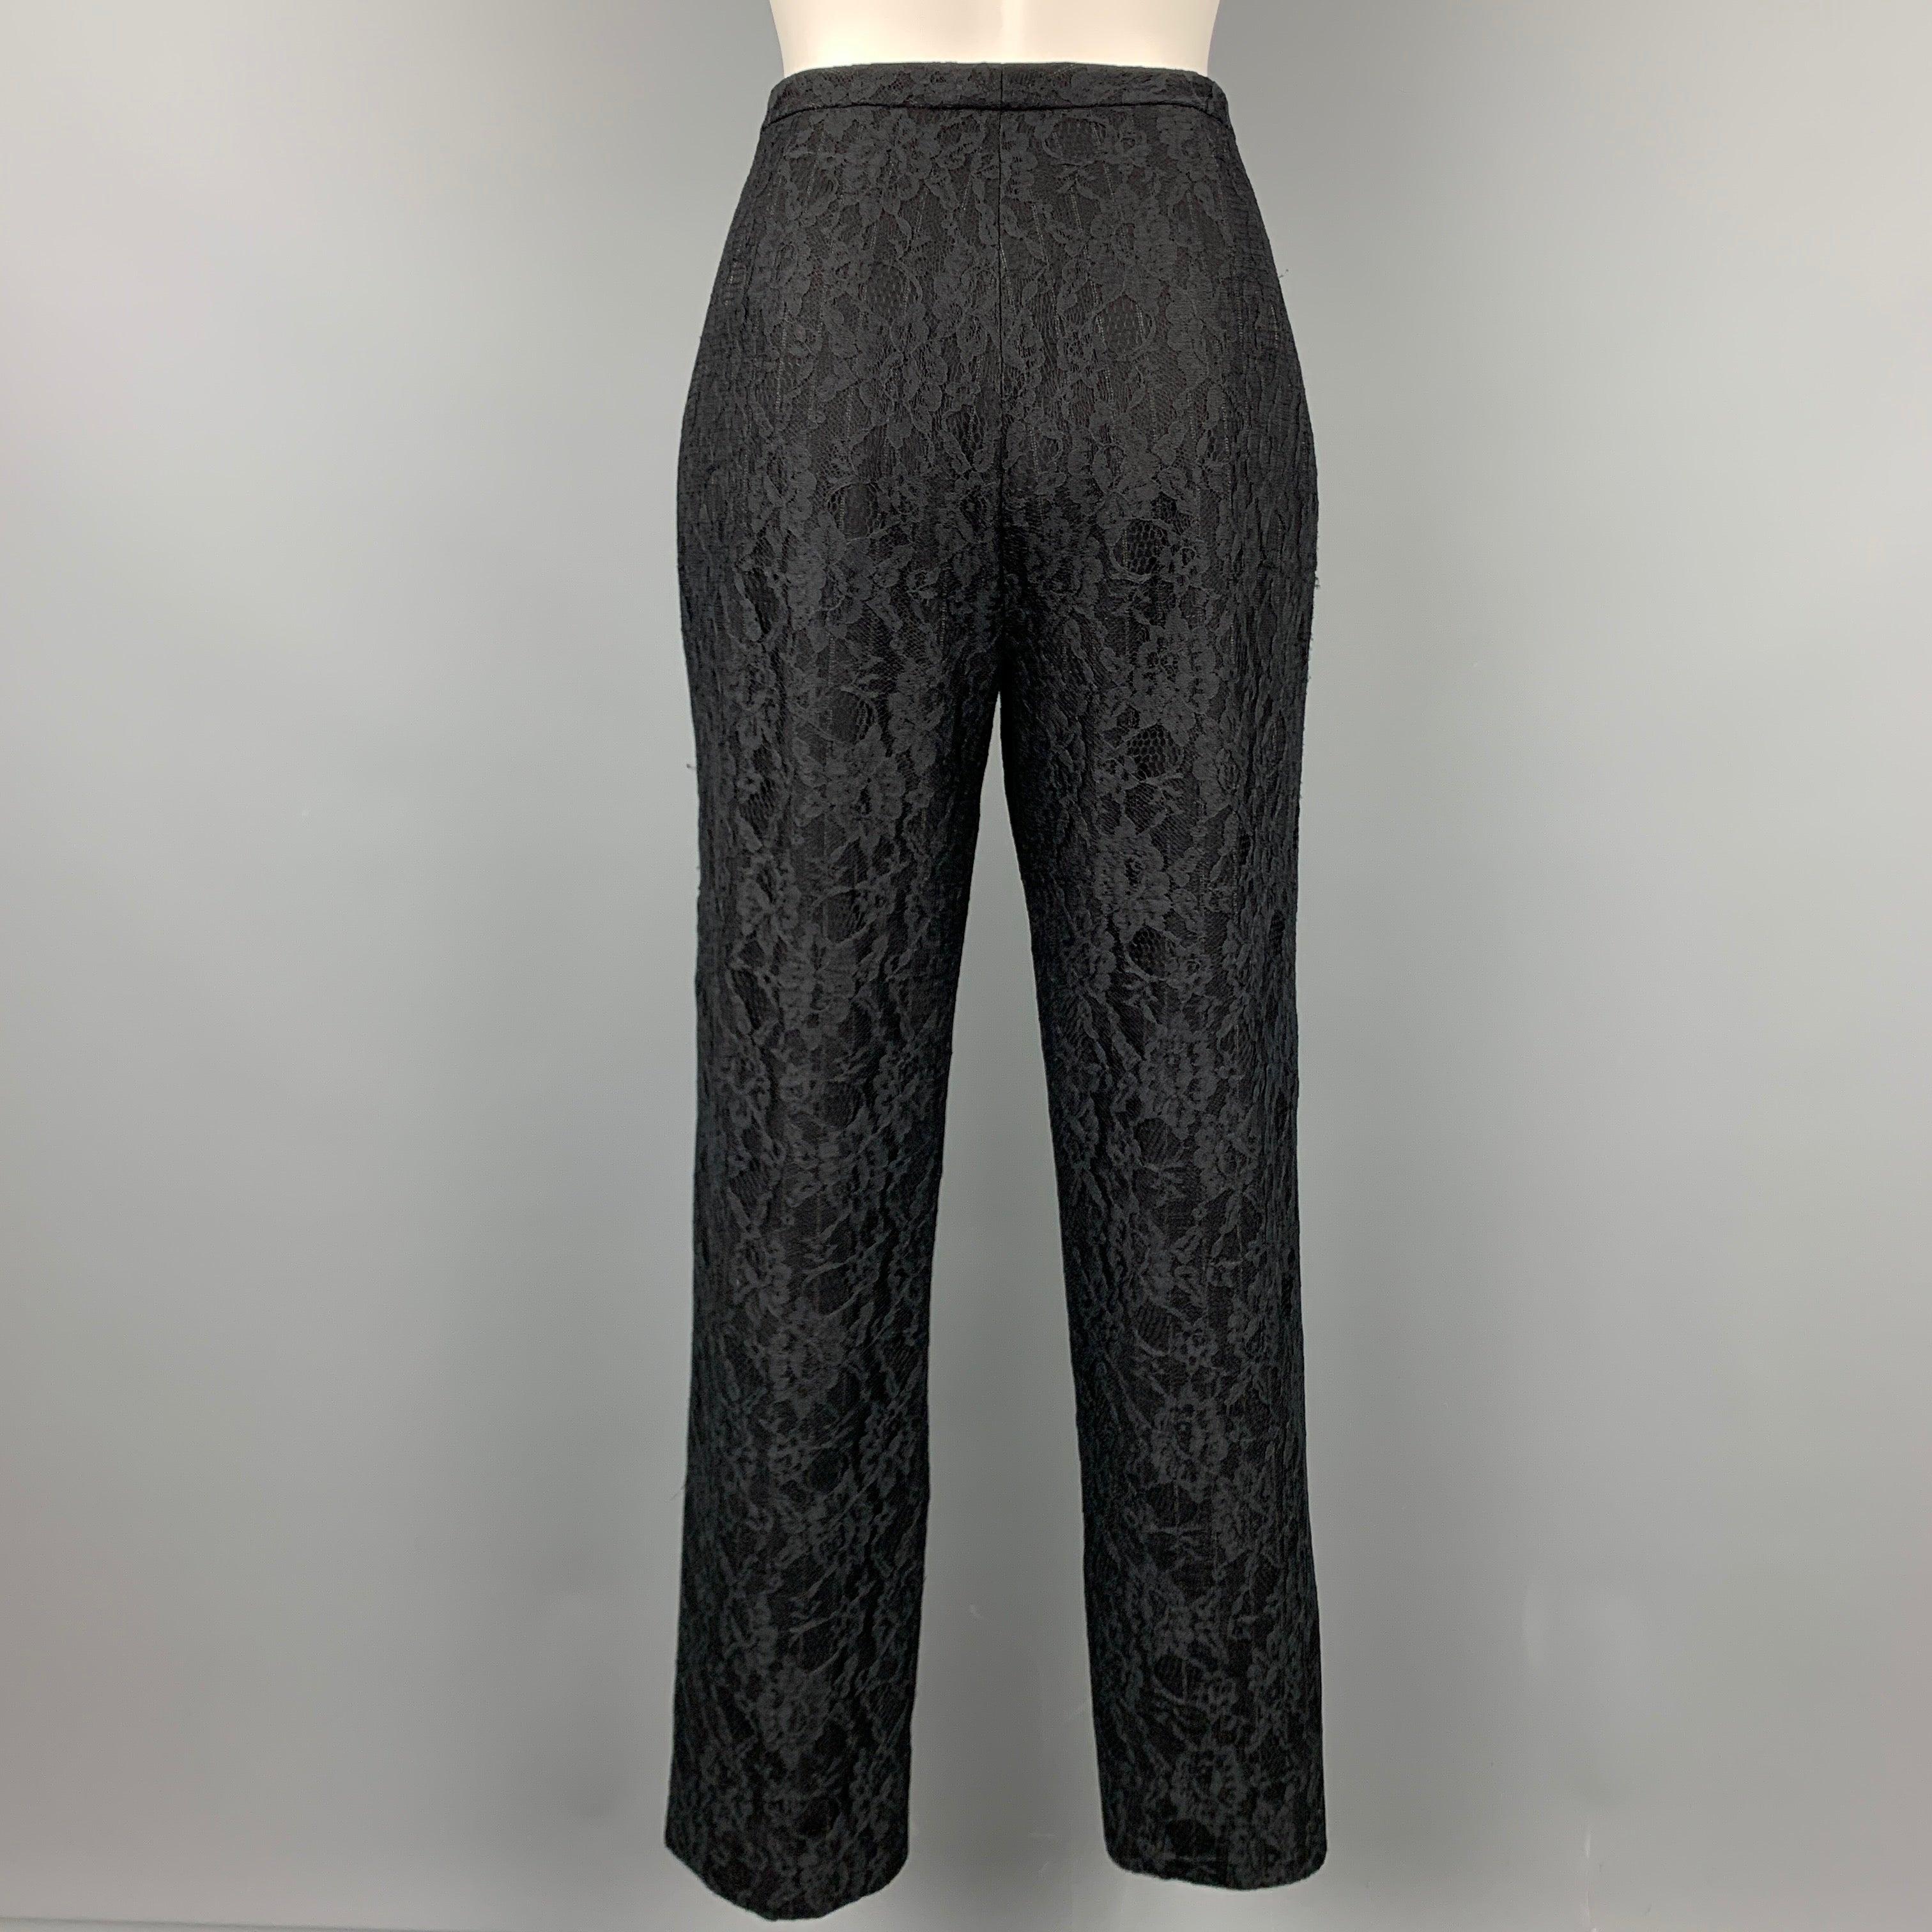 Vintage RICHARD TYLER Size 10 Black Lace Wool Blend Evening Dress Pants In Good Condition For Sale In San Francisco, CA